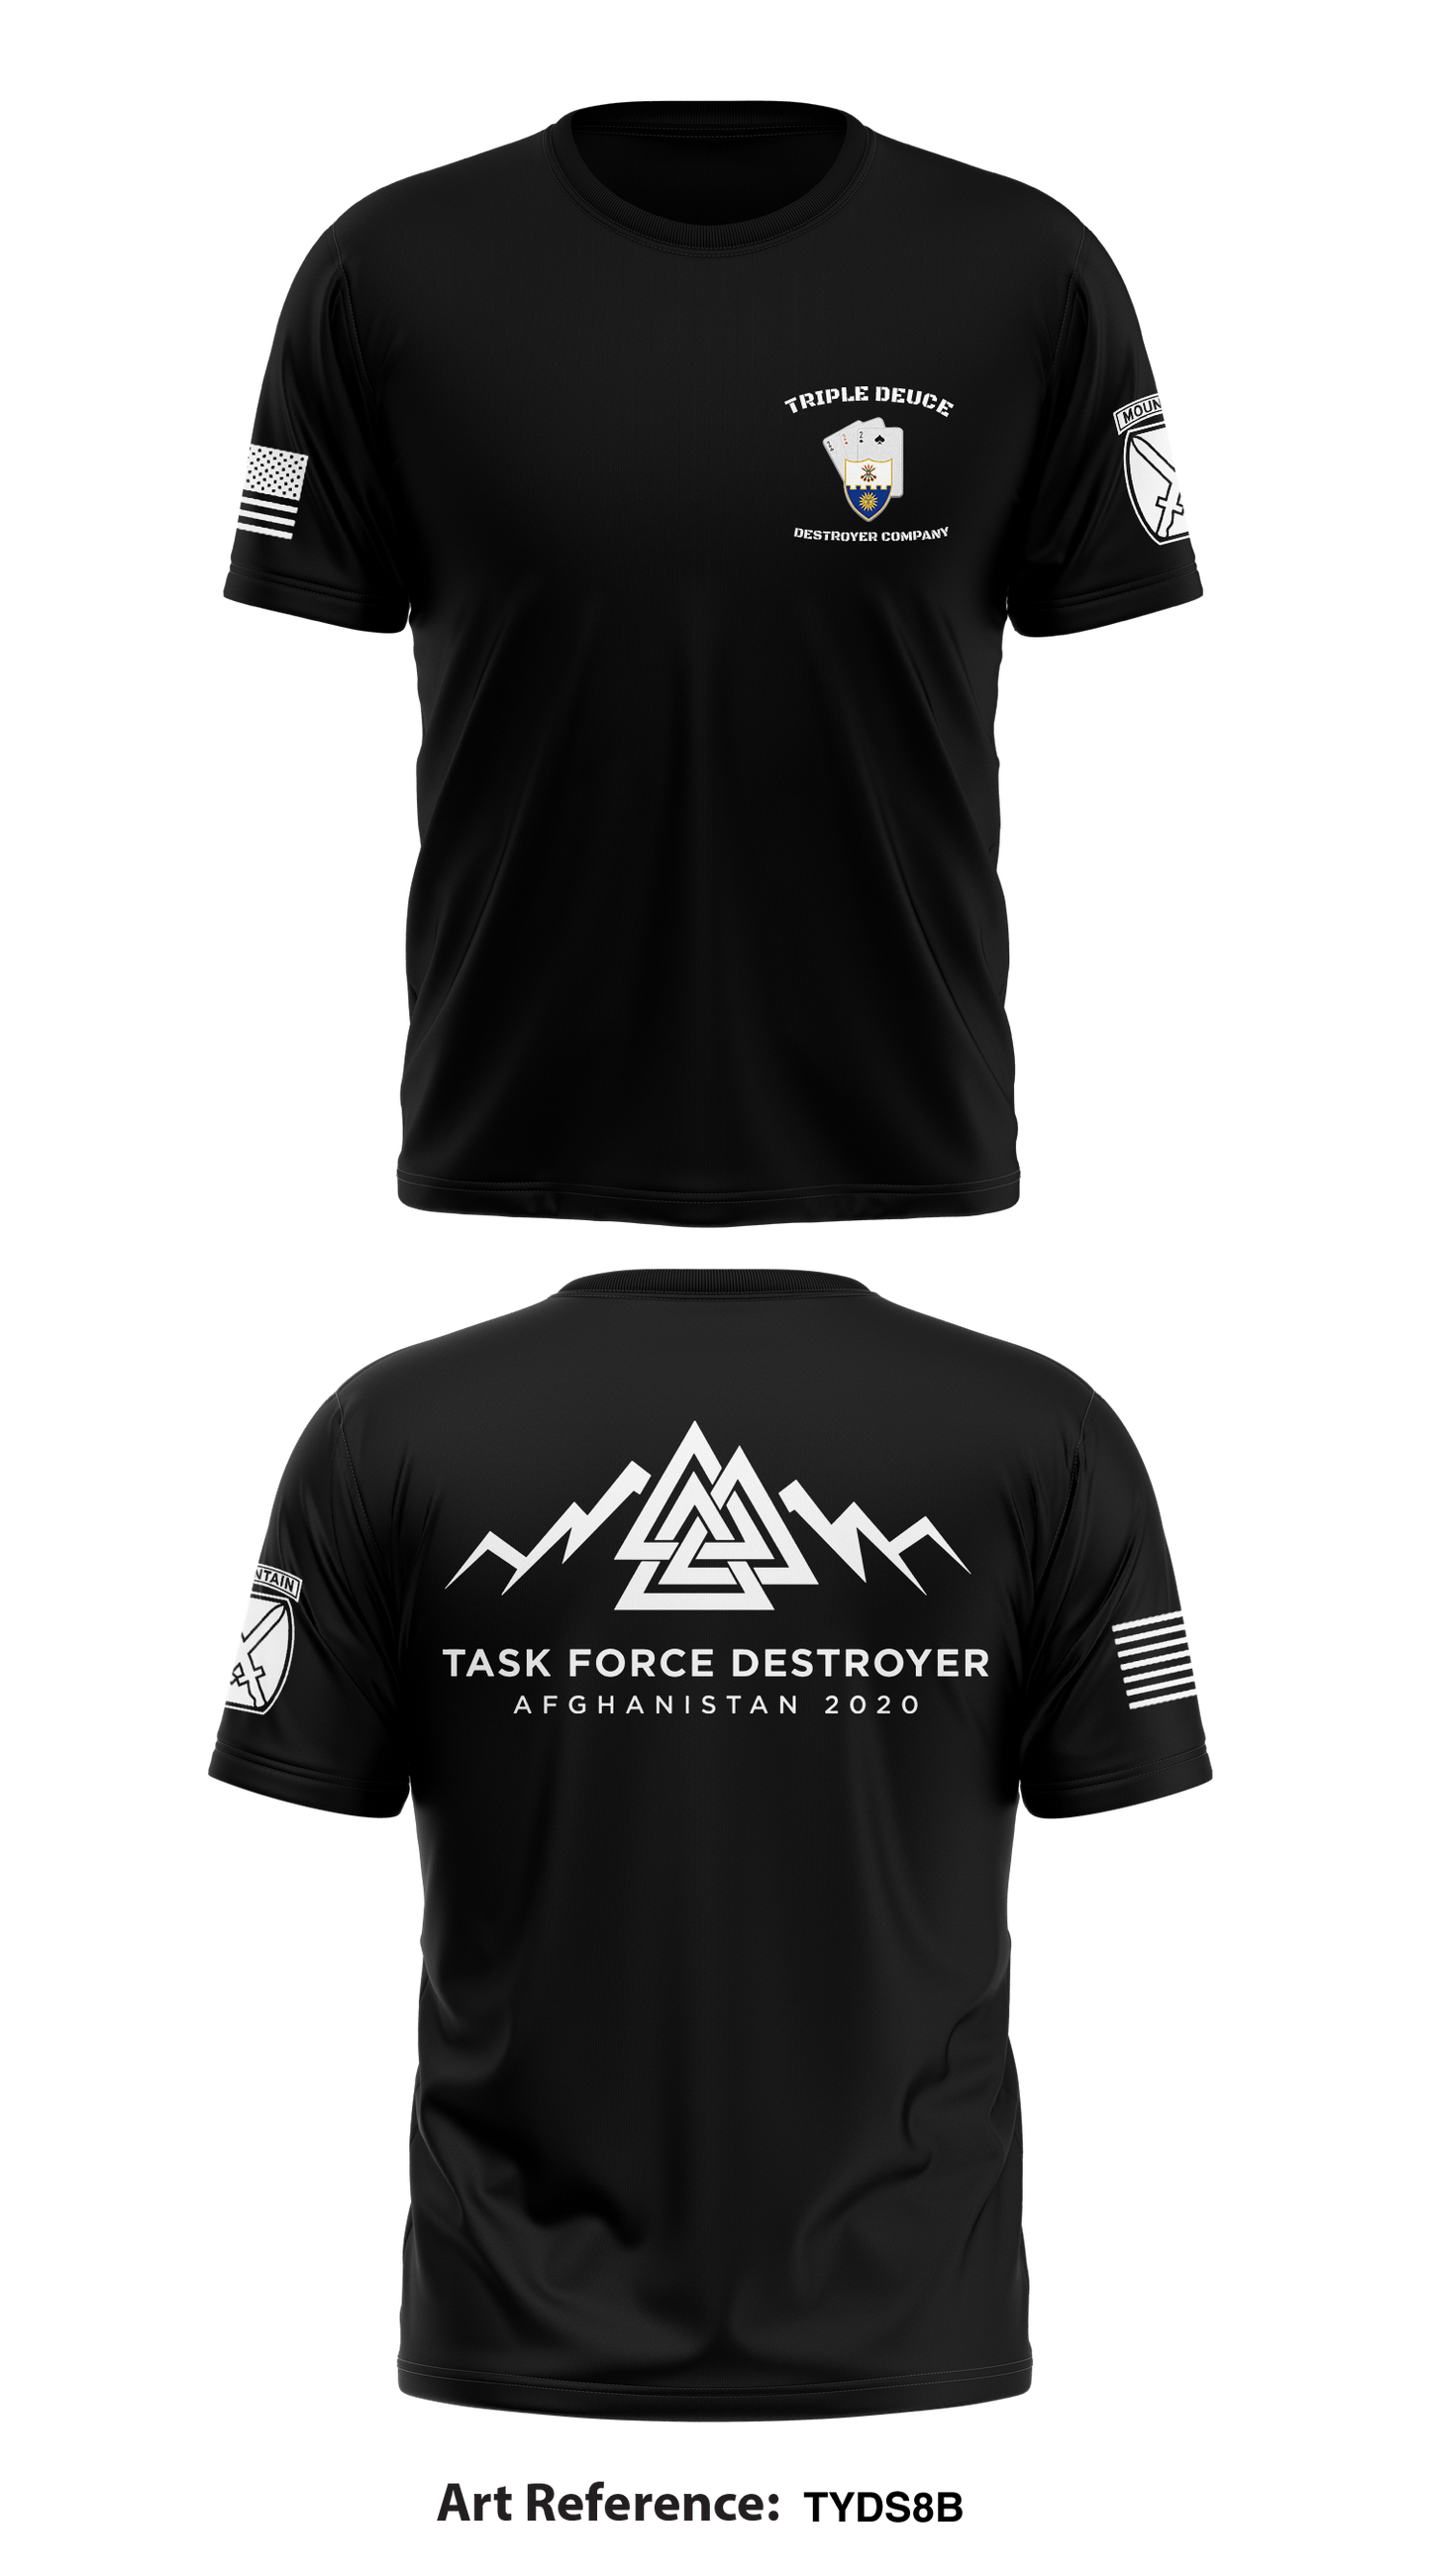 2-22 Destroyer Company Store 1 Core Men's SS Performance Tee - TydS8b